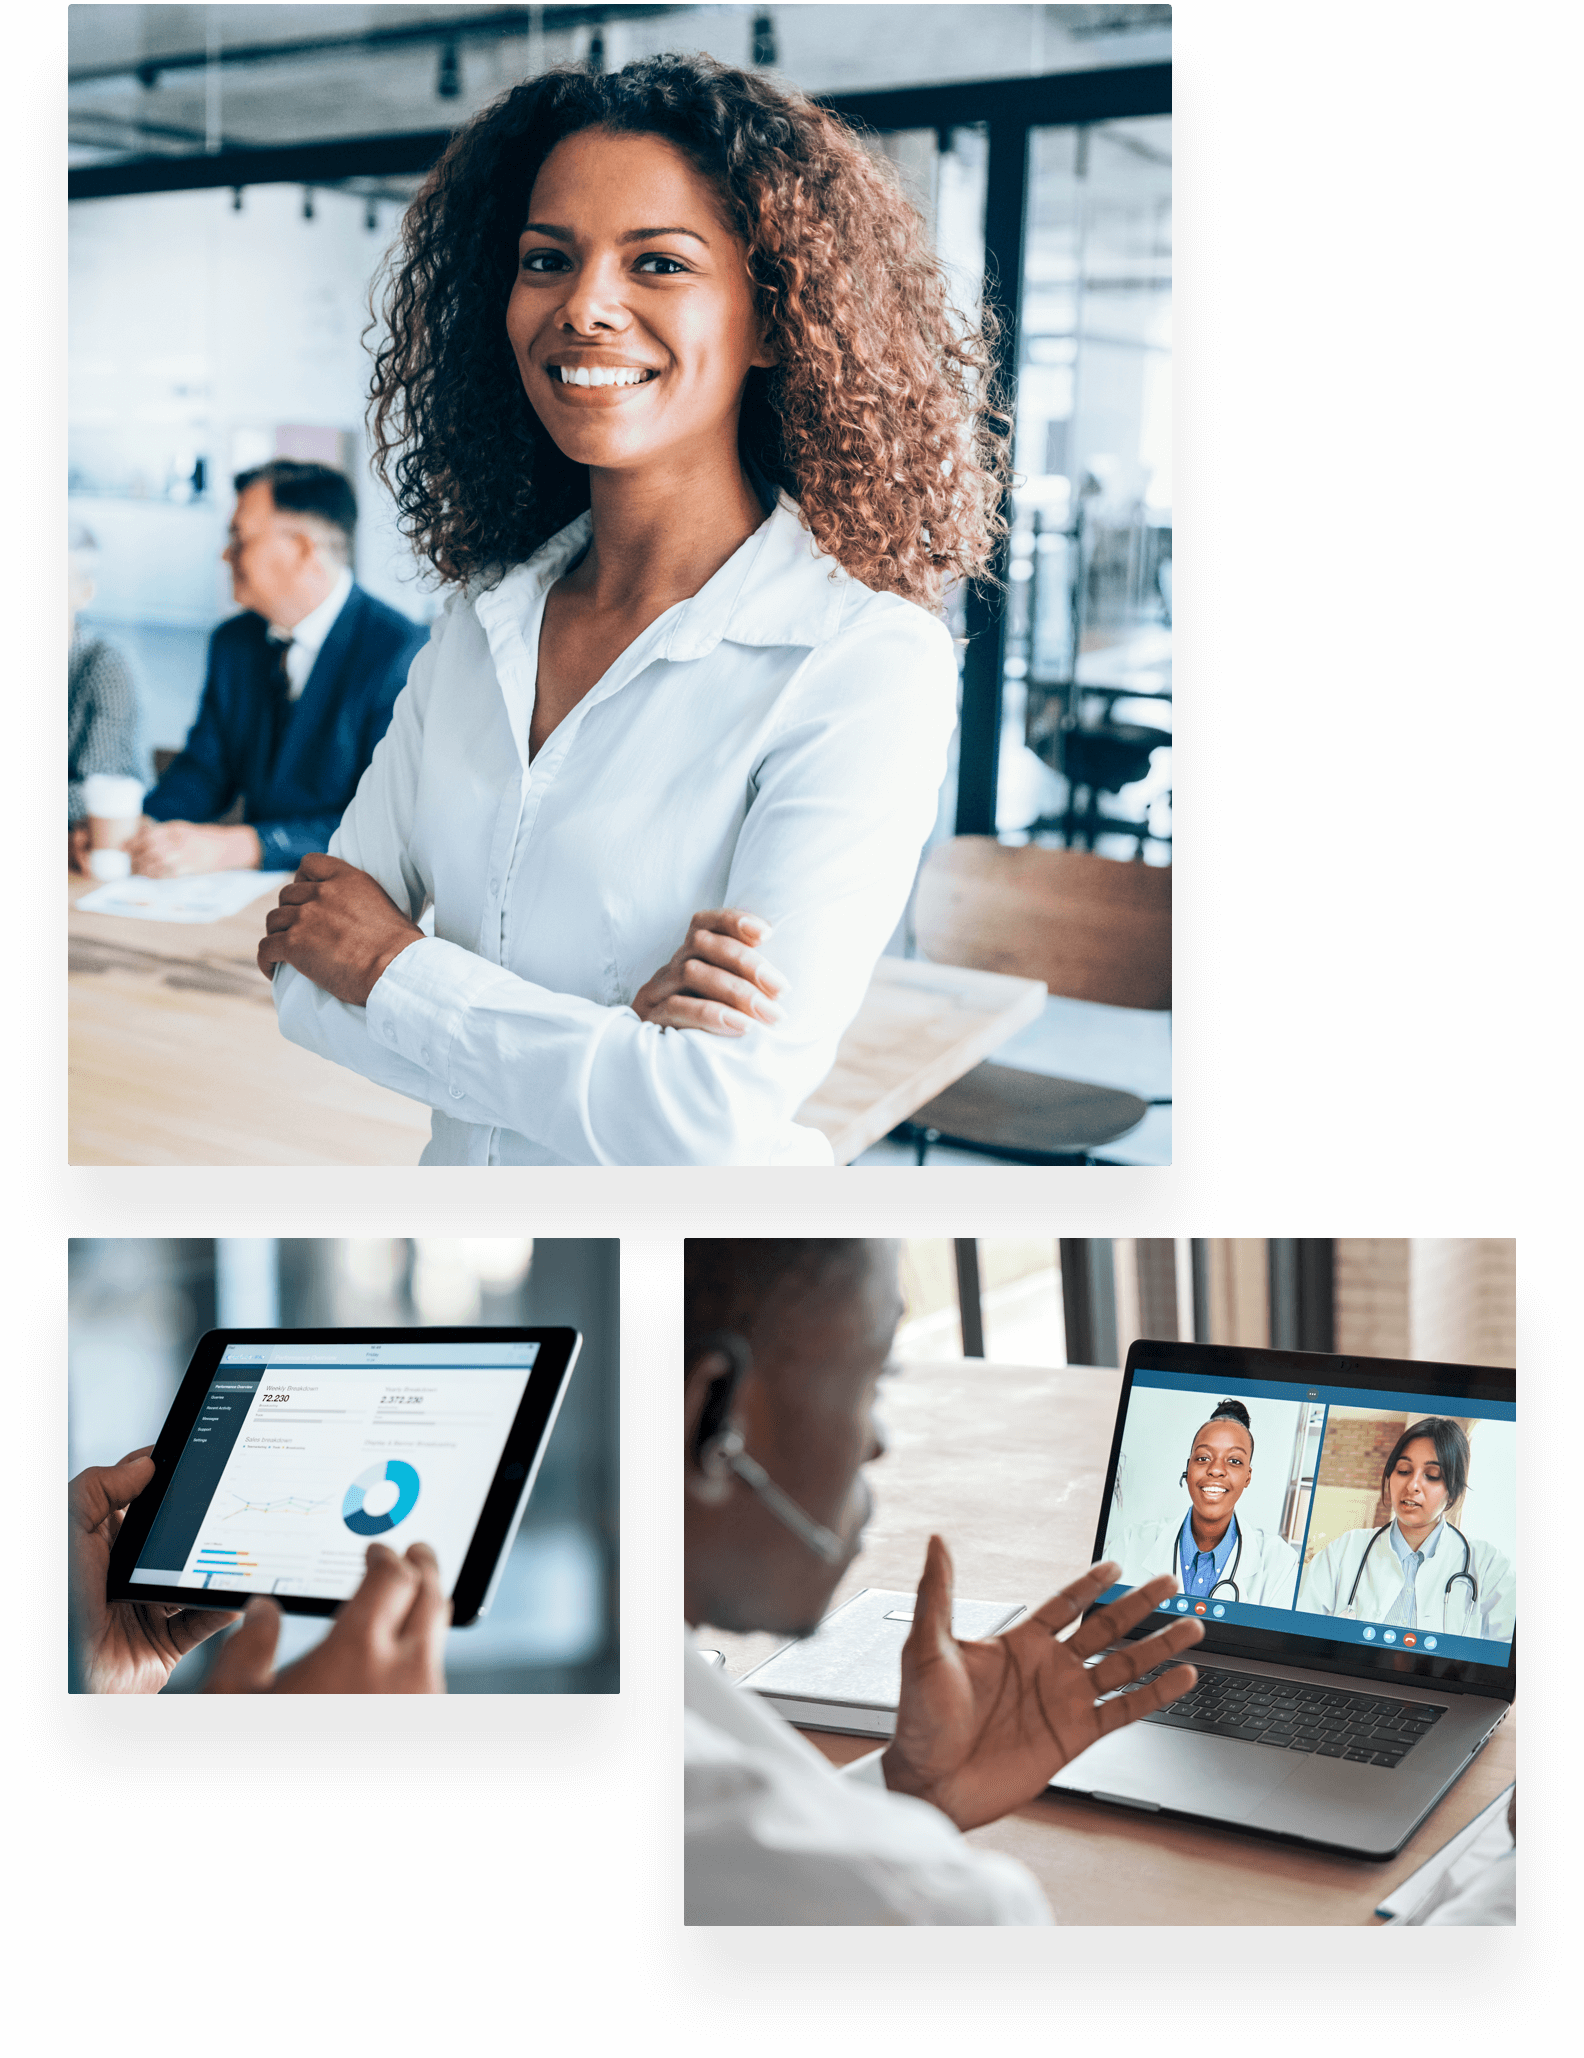 Collage of photos including a business woman smiling and doctors on a video call